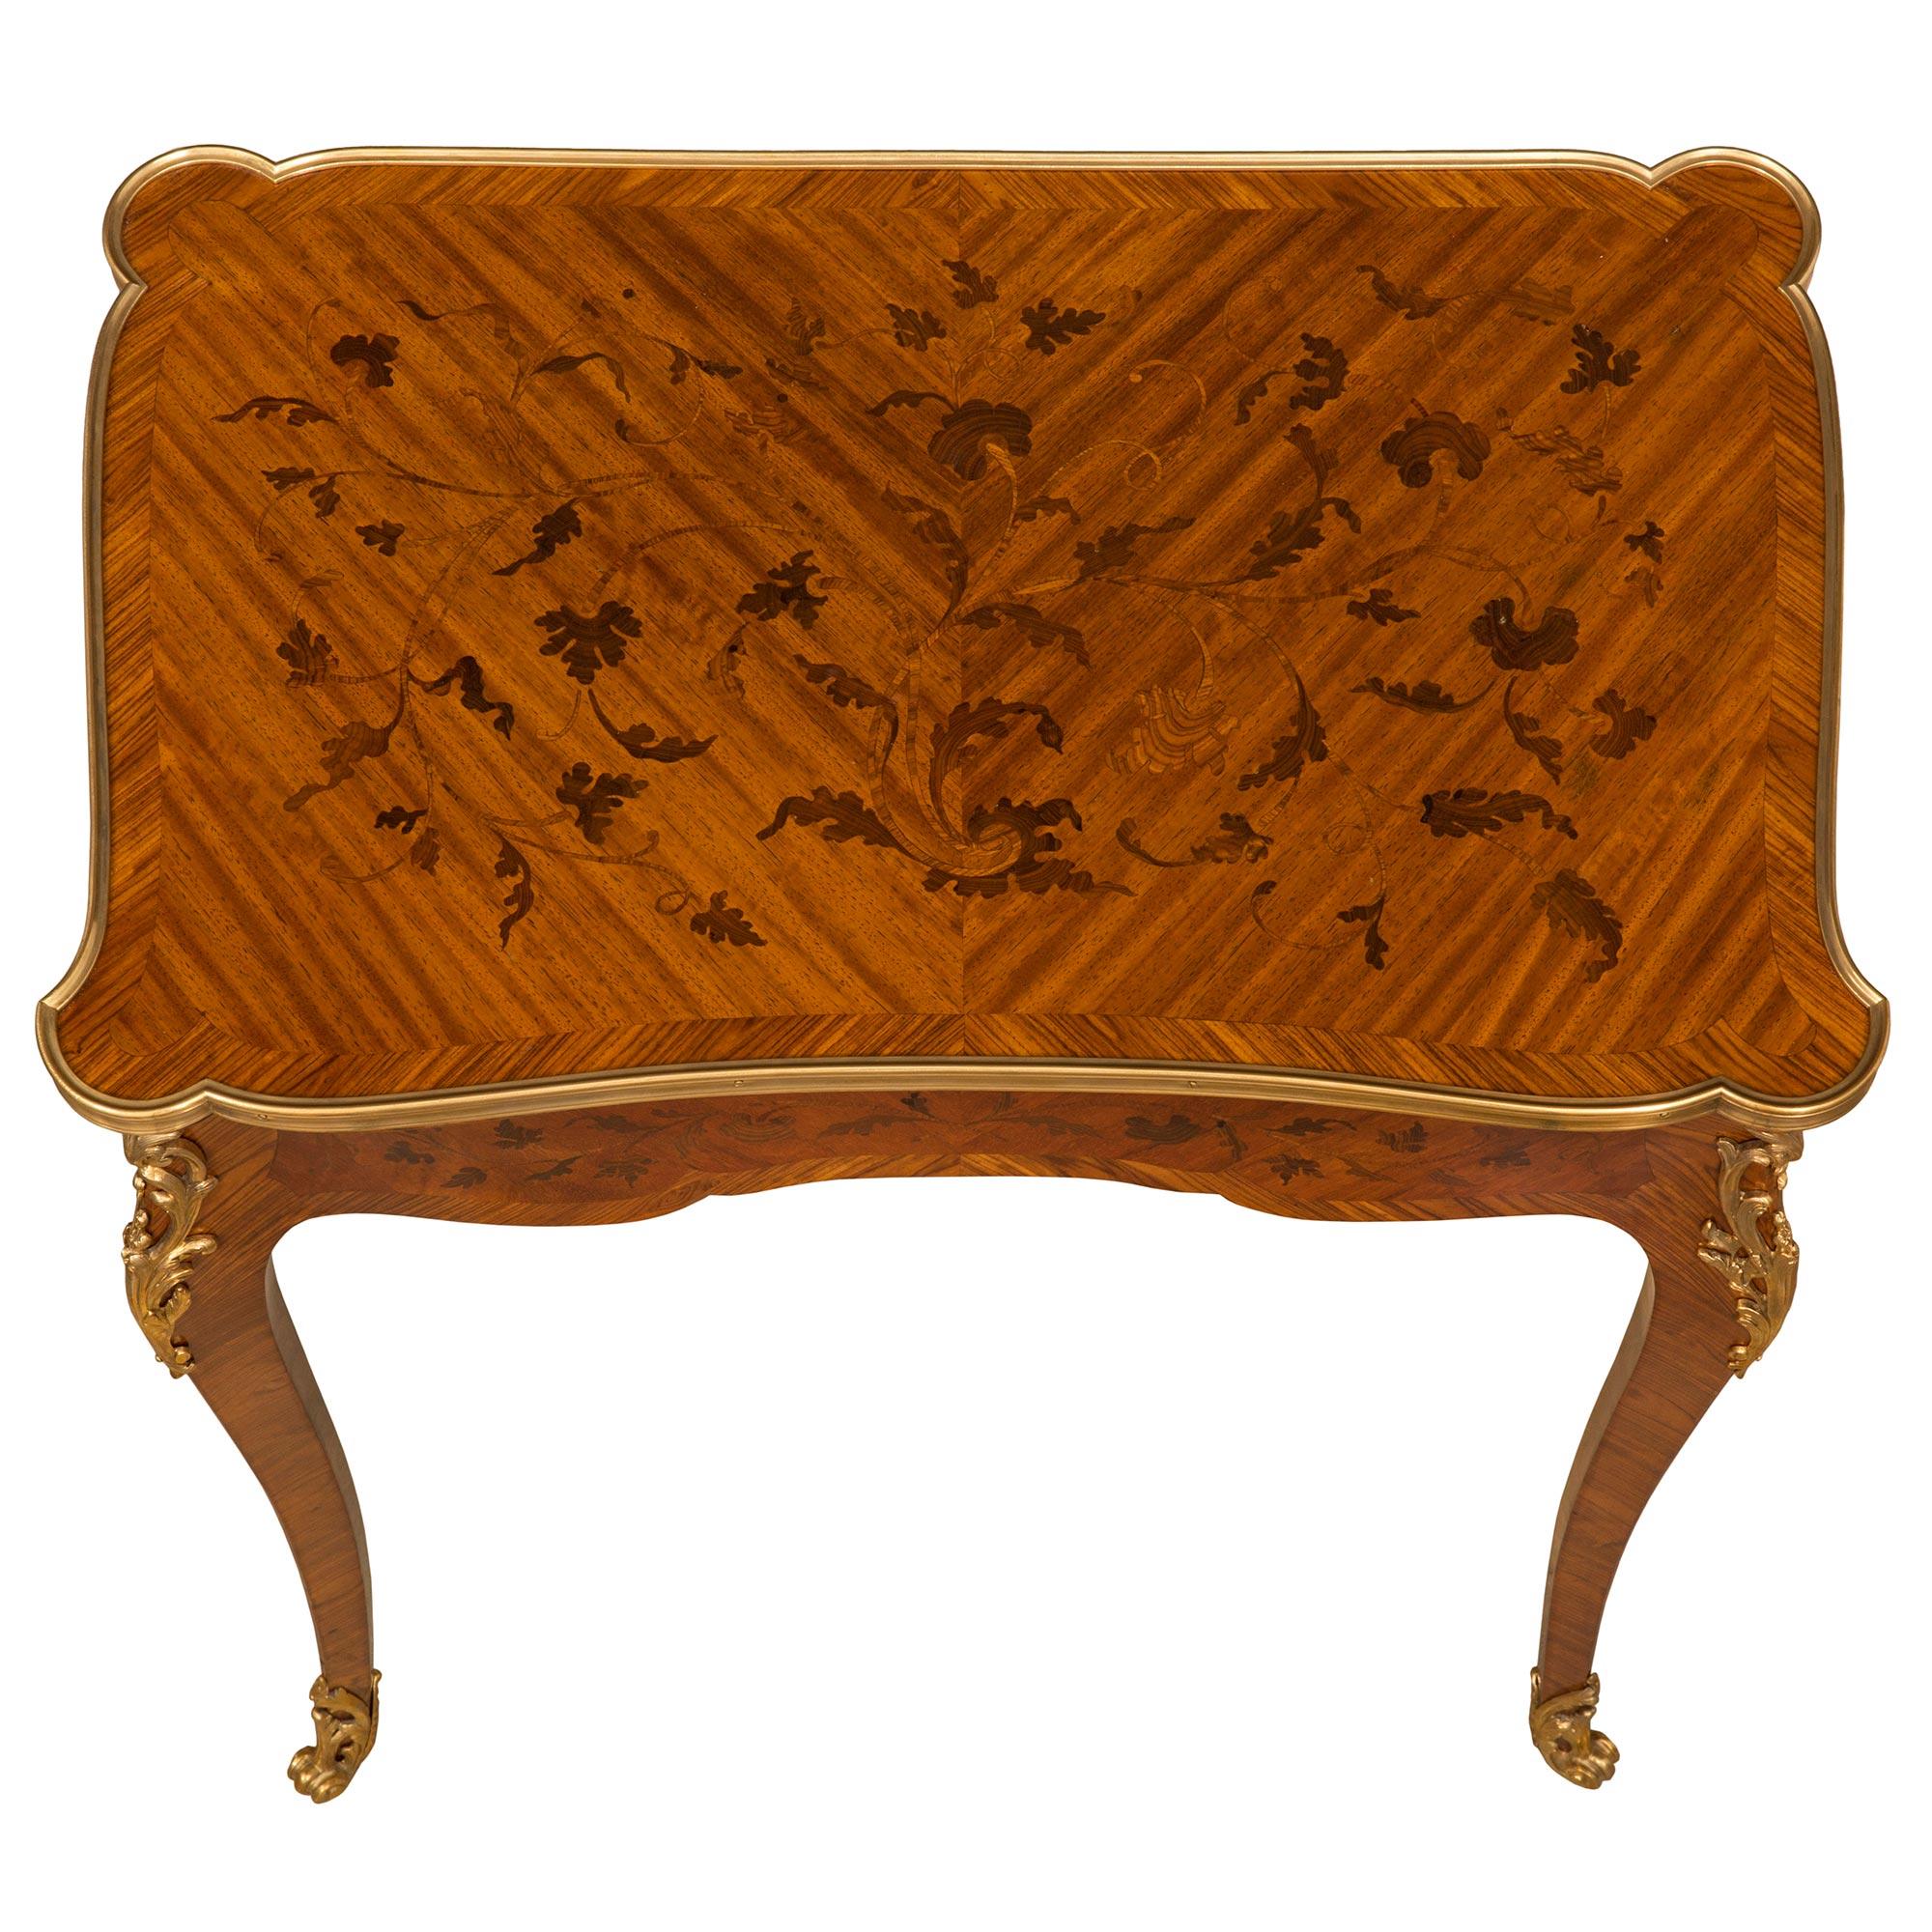 A beautiful and very unique French 19th century Louis XV st. Kingwood, Tulipwood, and ormolu flip top games table. The table is raised by elegant slender cabriole legs with high quality pierced scrolled foliate fitted ormolu sabots and richly chased